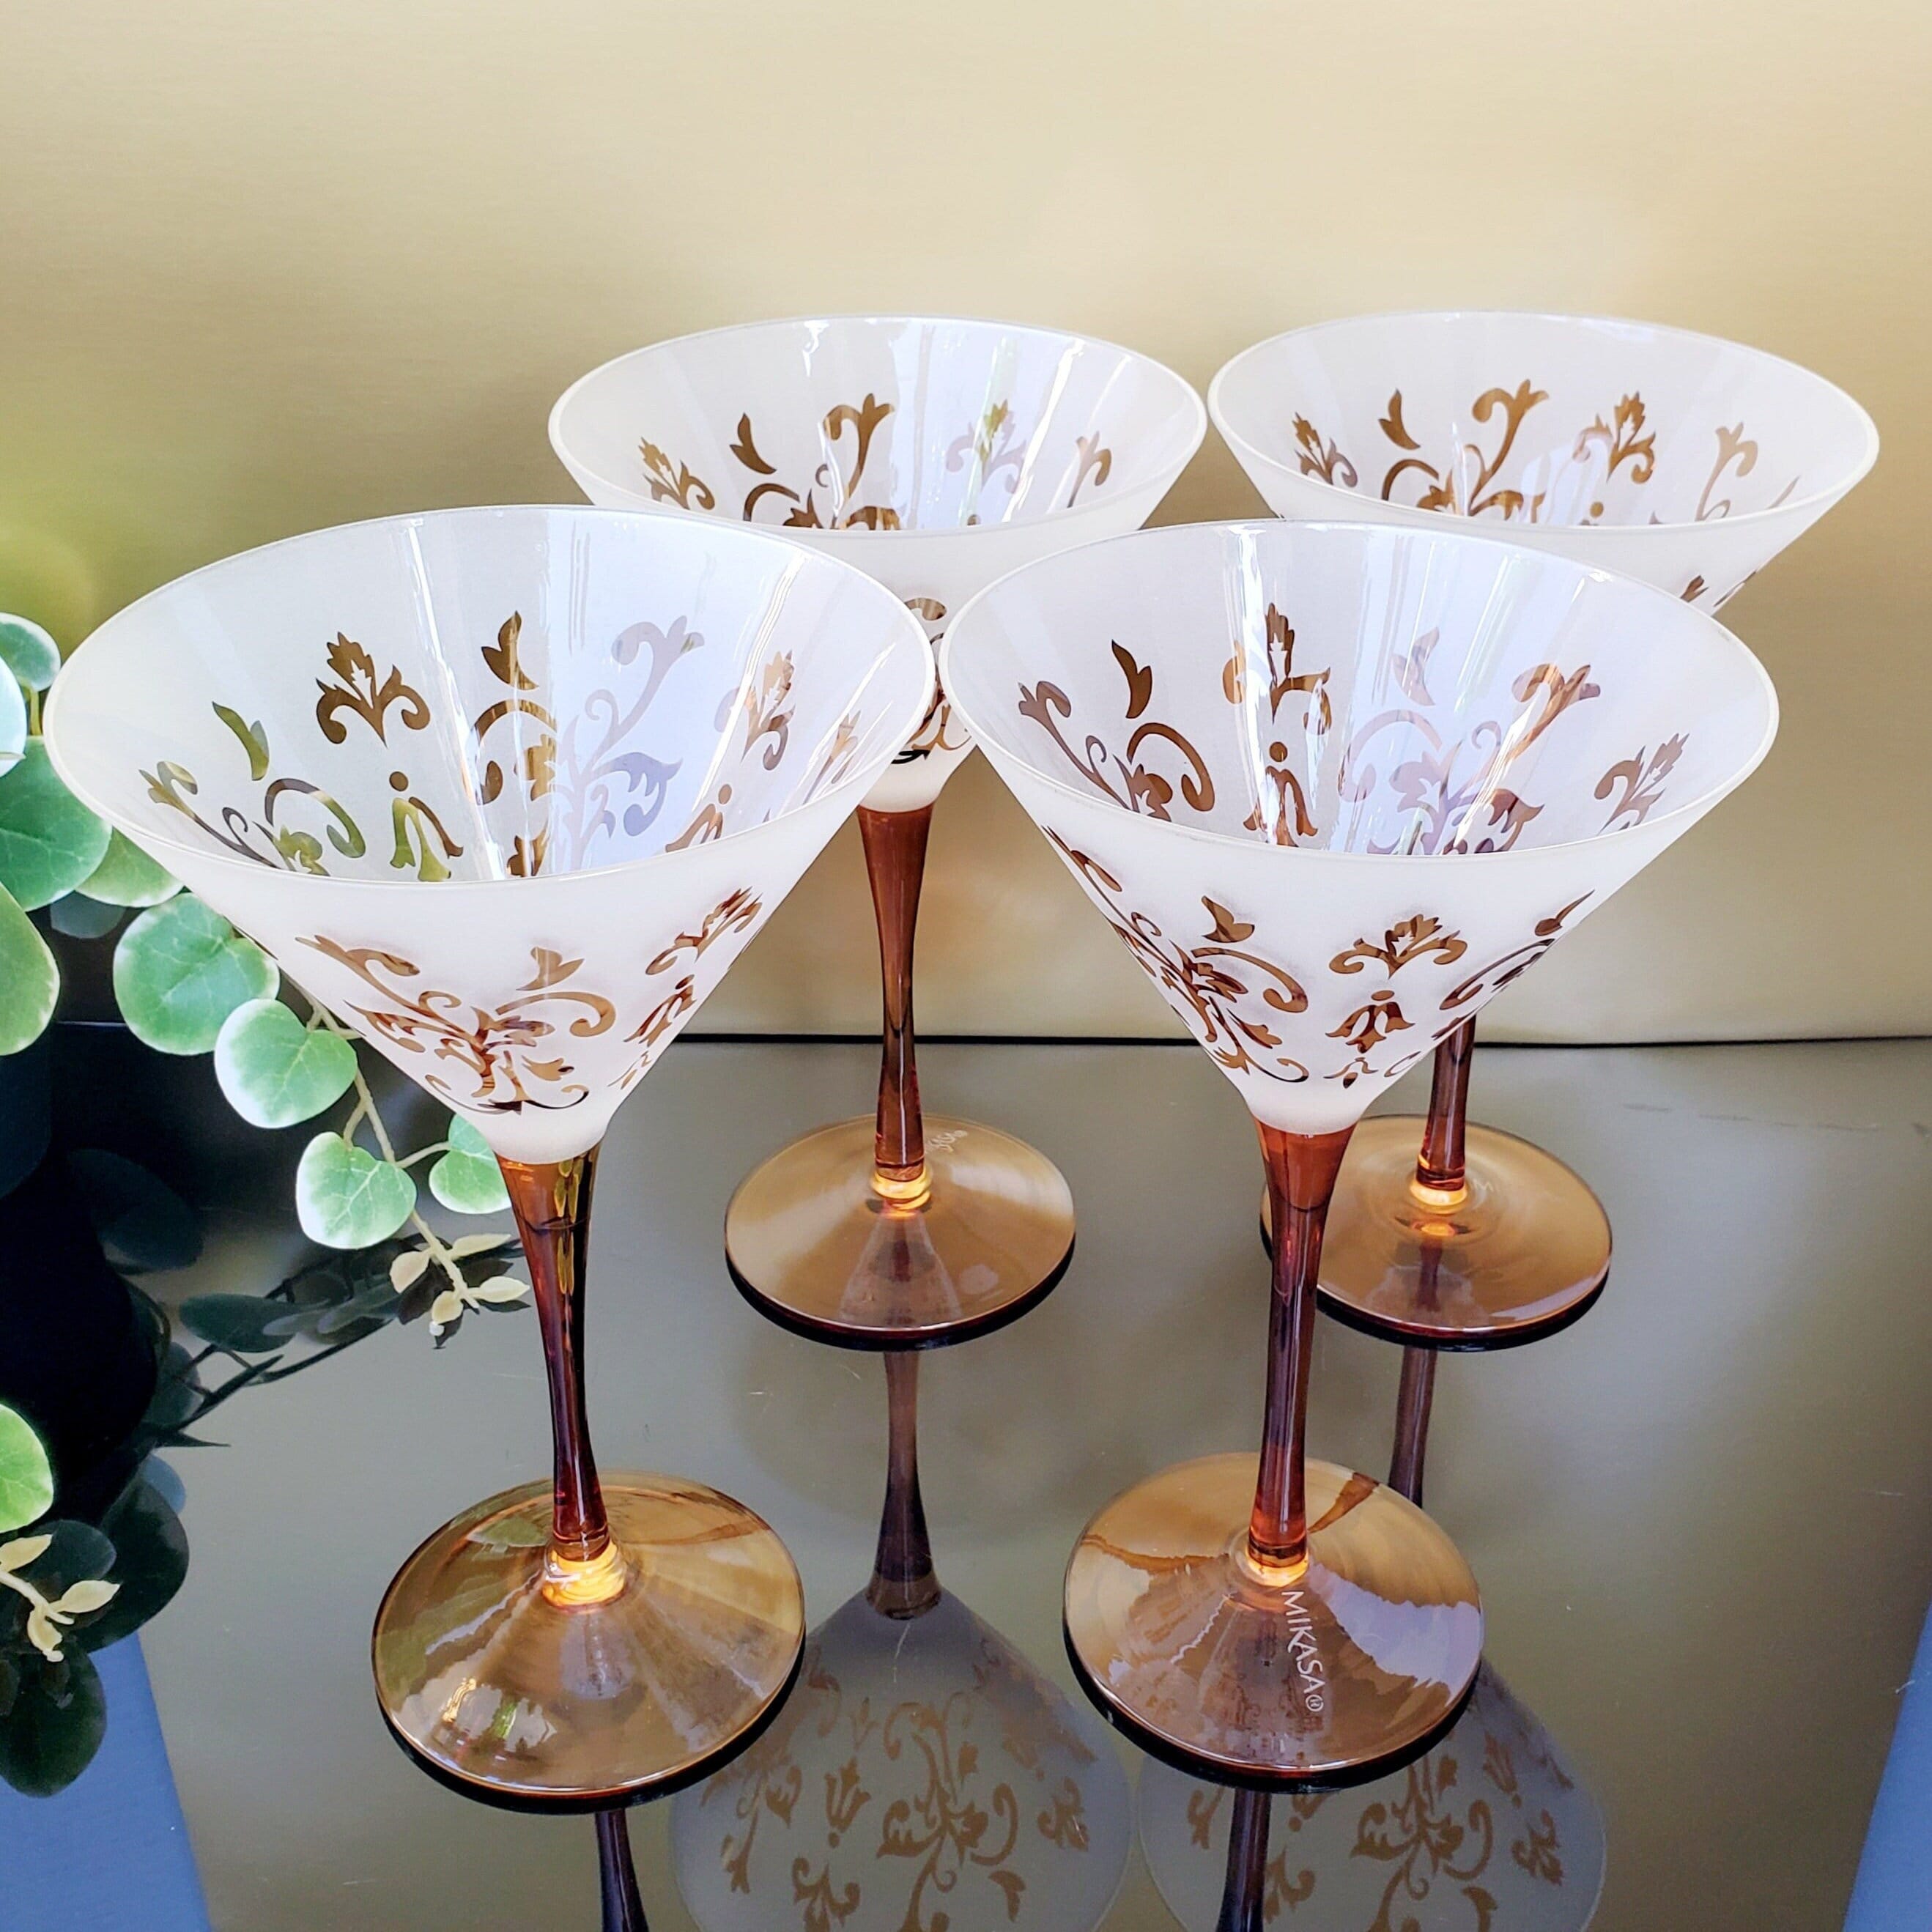 Vintage Mikasa Martini Glasses, Cocktail Barware, Amber-gold/brown &  Frosted in Artistry Pattern, 8 Tall, Set of 4, Free Shipping 